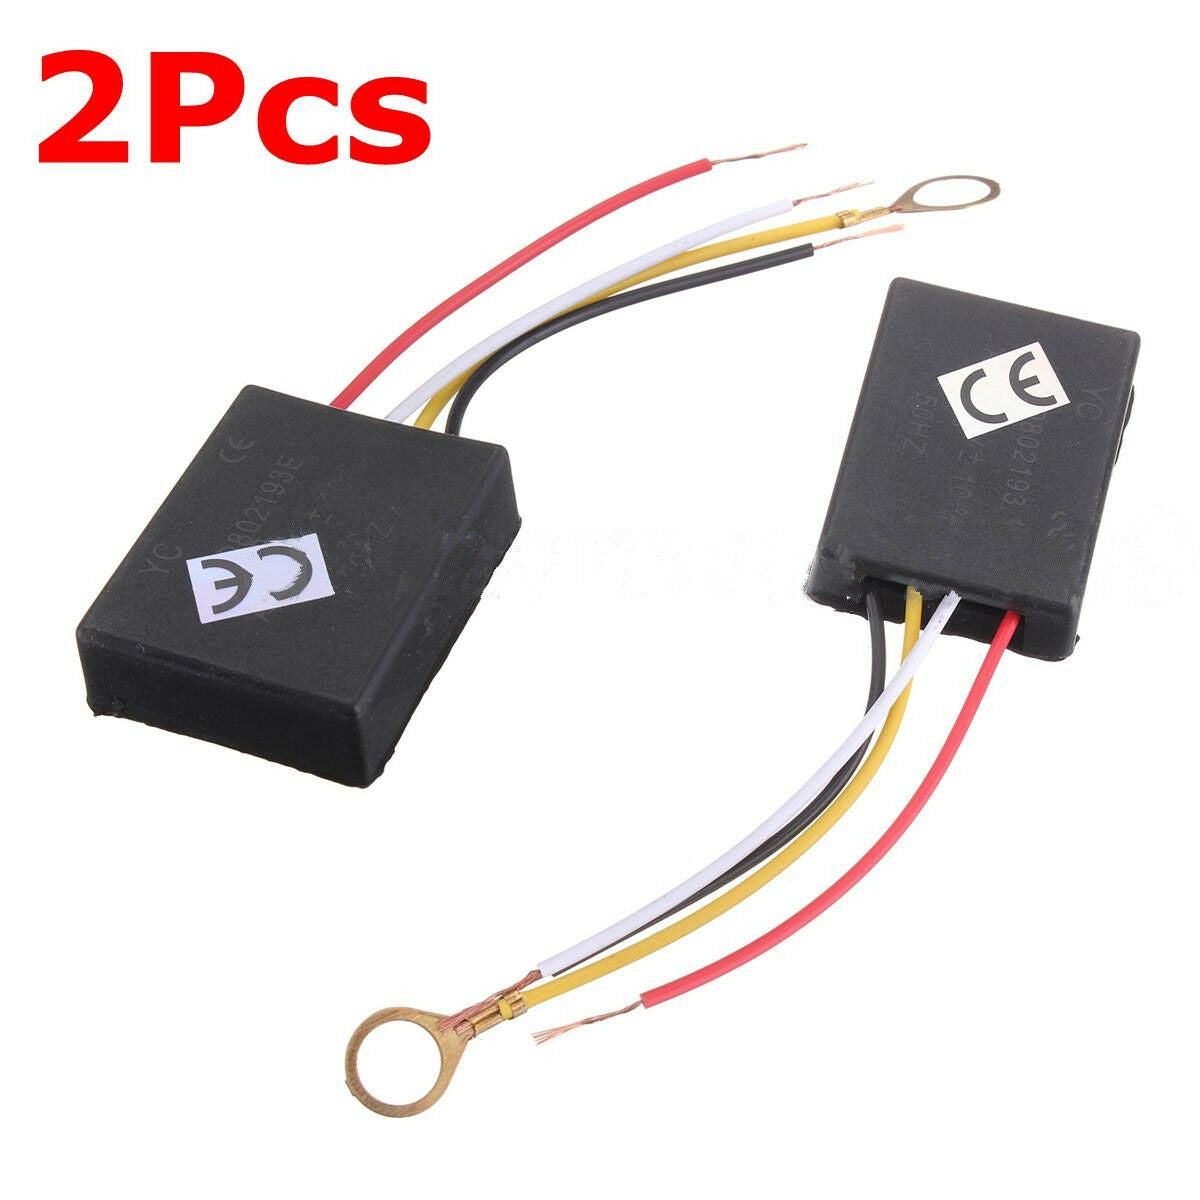 2X 3Way Touch Sensor Switch Control for Repairing Lamp Desk Light Bulb Dimmer Fx